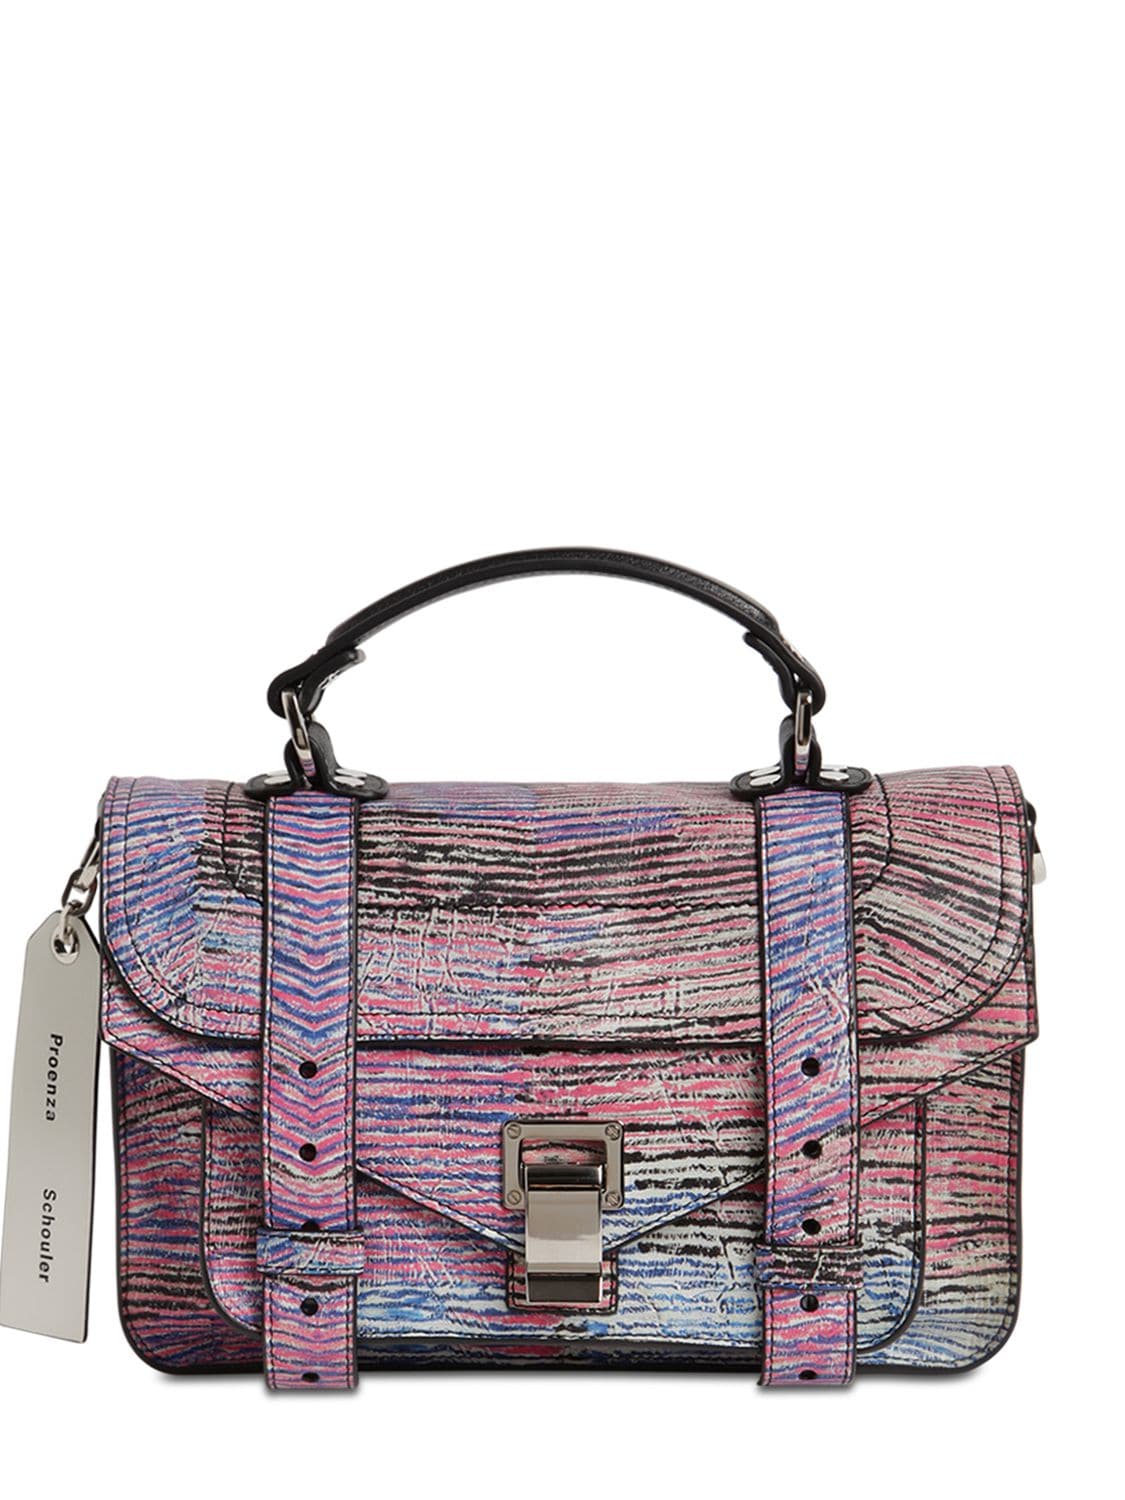 PROENZA SCHOULER PS1 TINY LIMITED EDITION ANNIVERSARY BAG,71IJ4Z008-ODEWMQ2